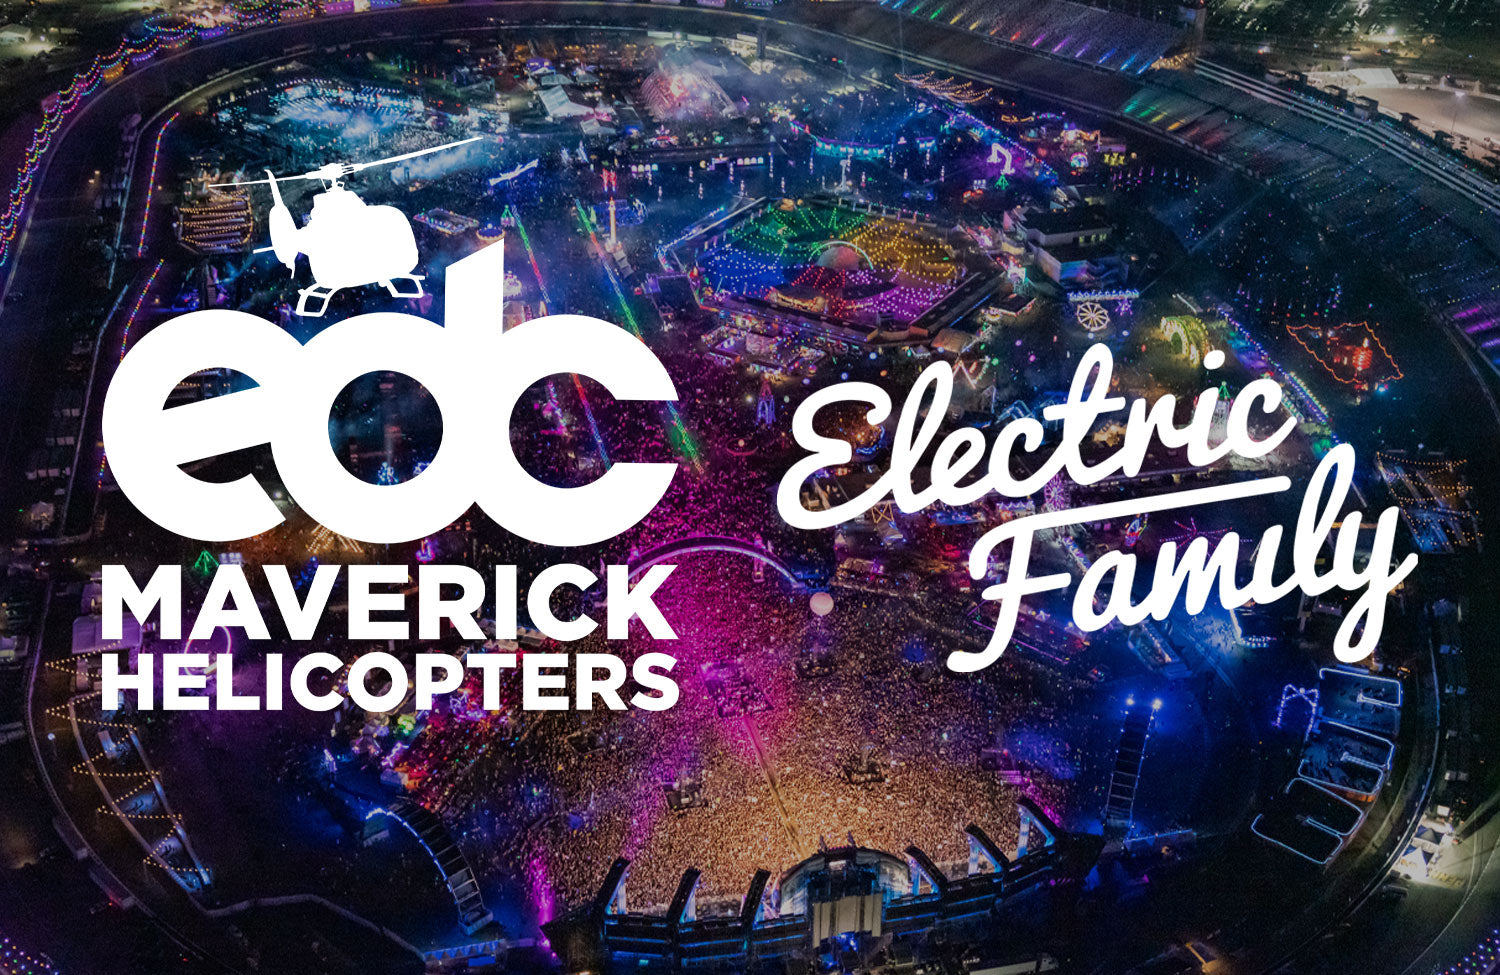 Helicopter Flight Over EDC Las Vegas Giveaway!